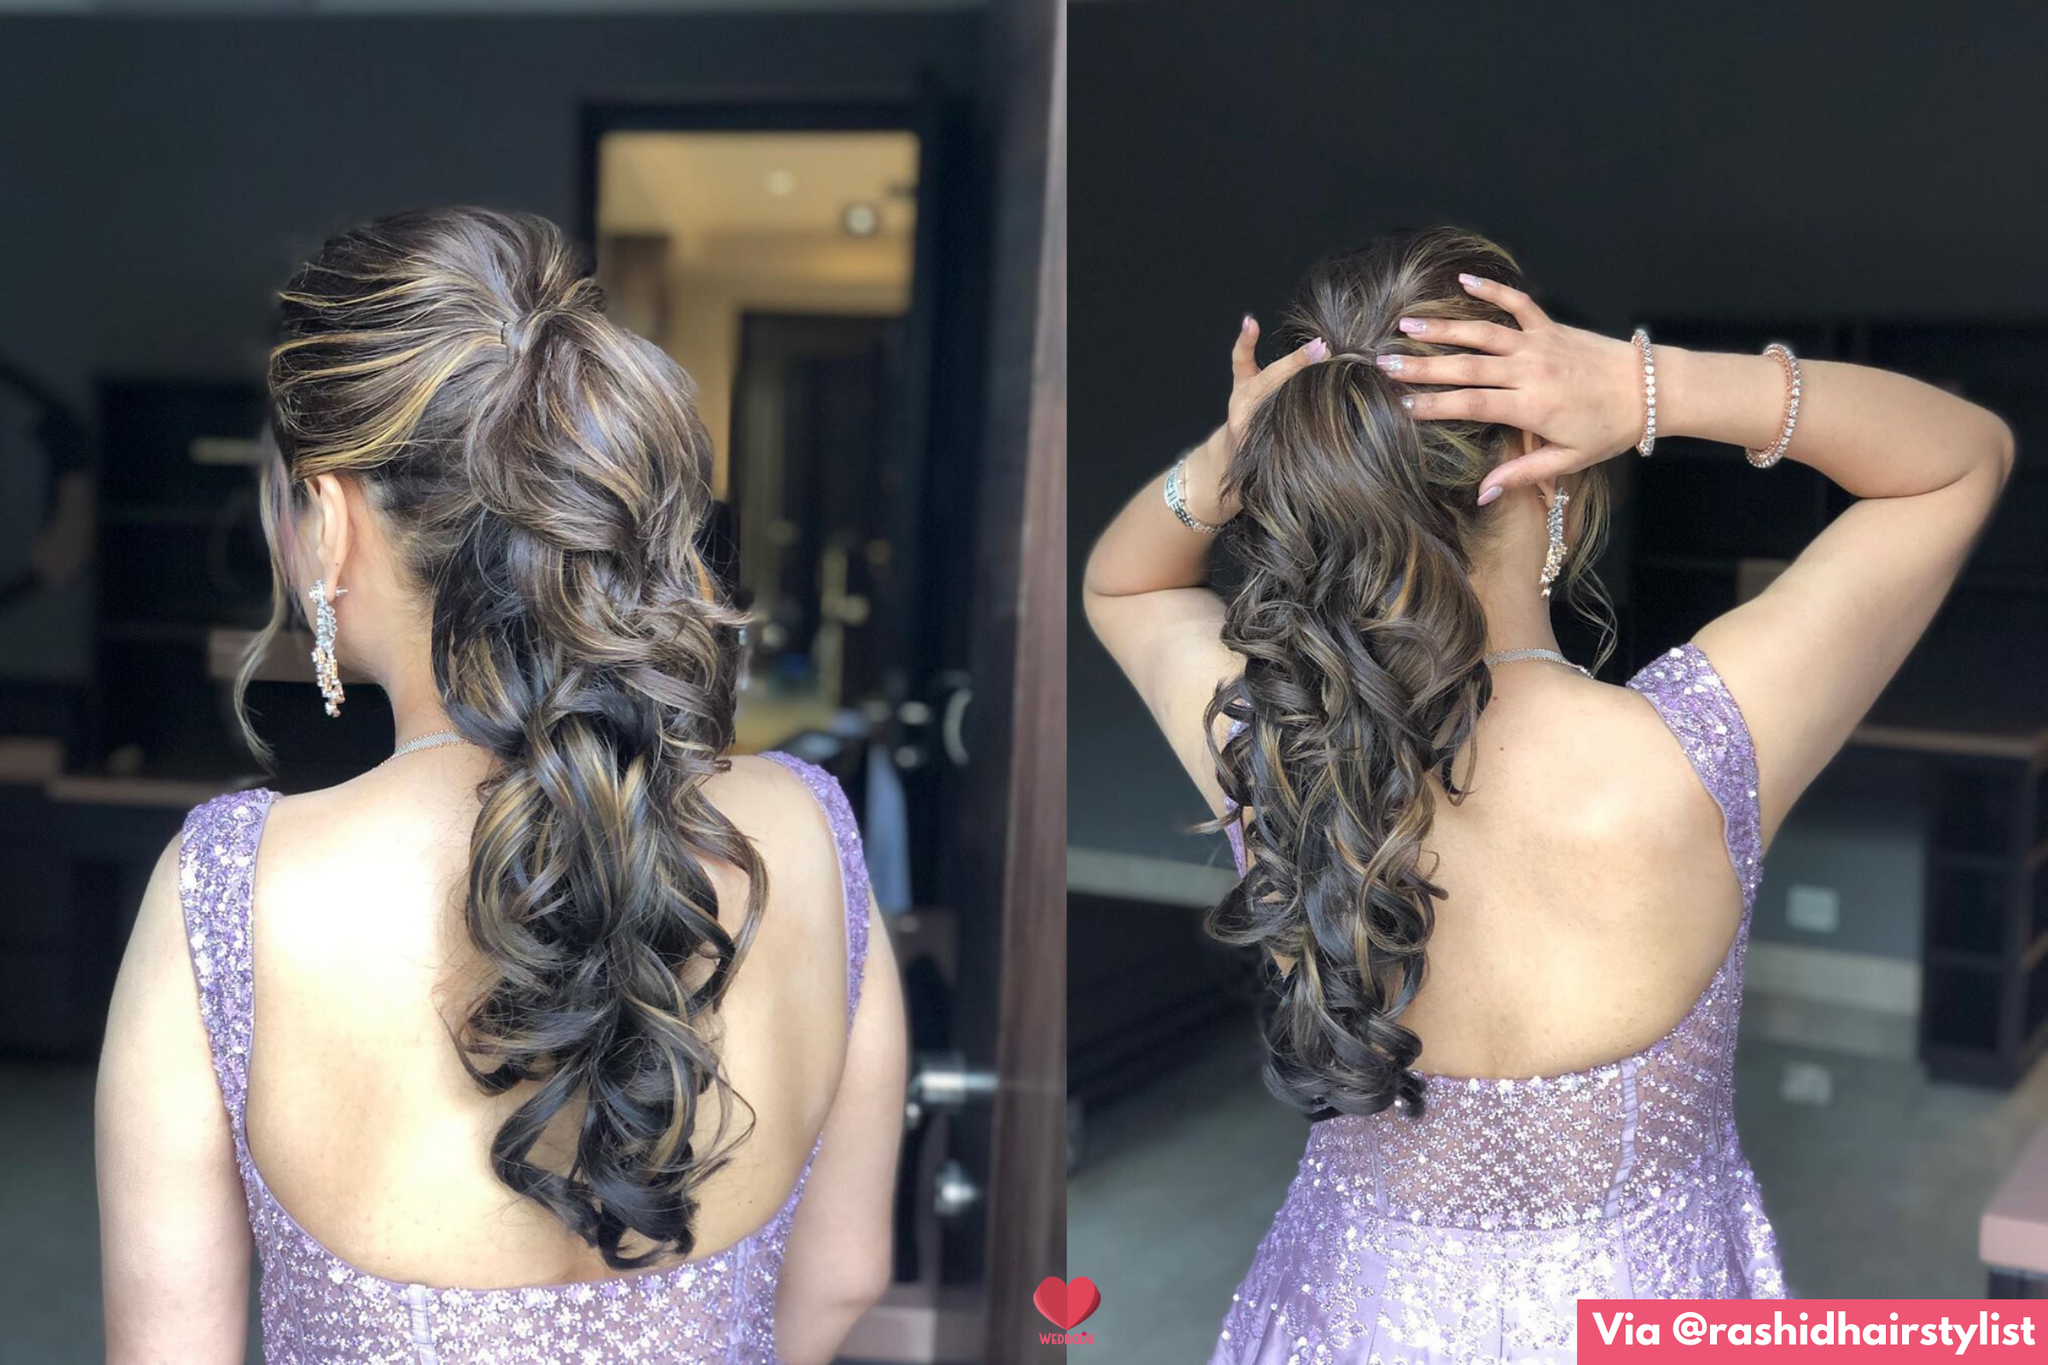 16 Beautiful Indian Wedding Hairstyles: Curated List